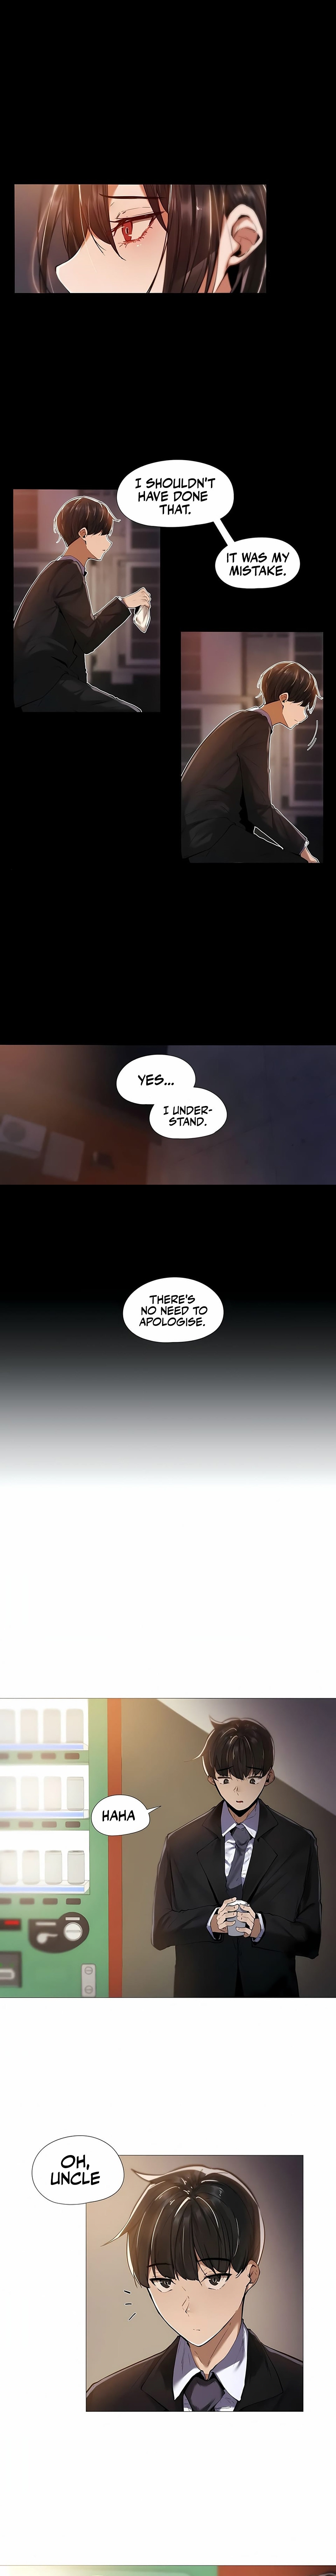 Let’s Do it After Work - Chapter 11 Page 5